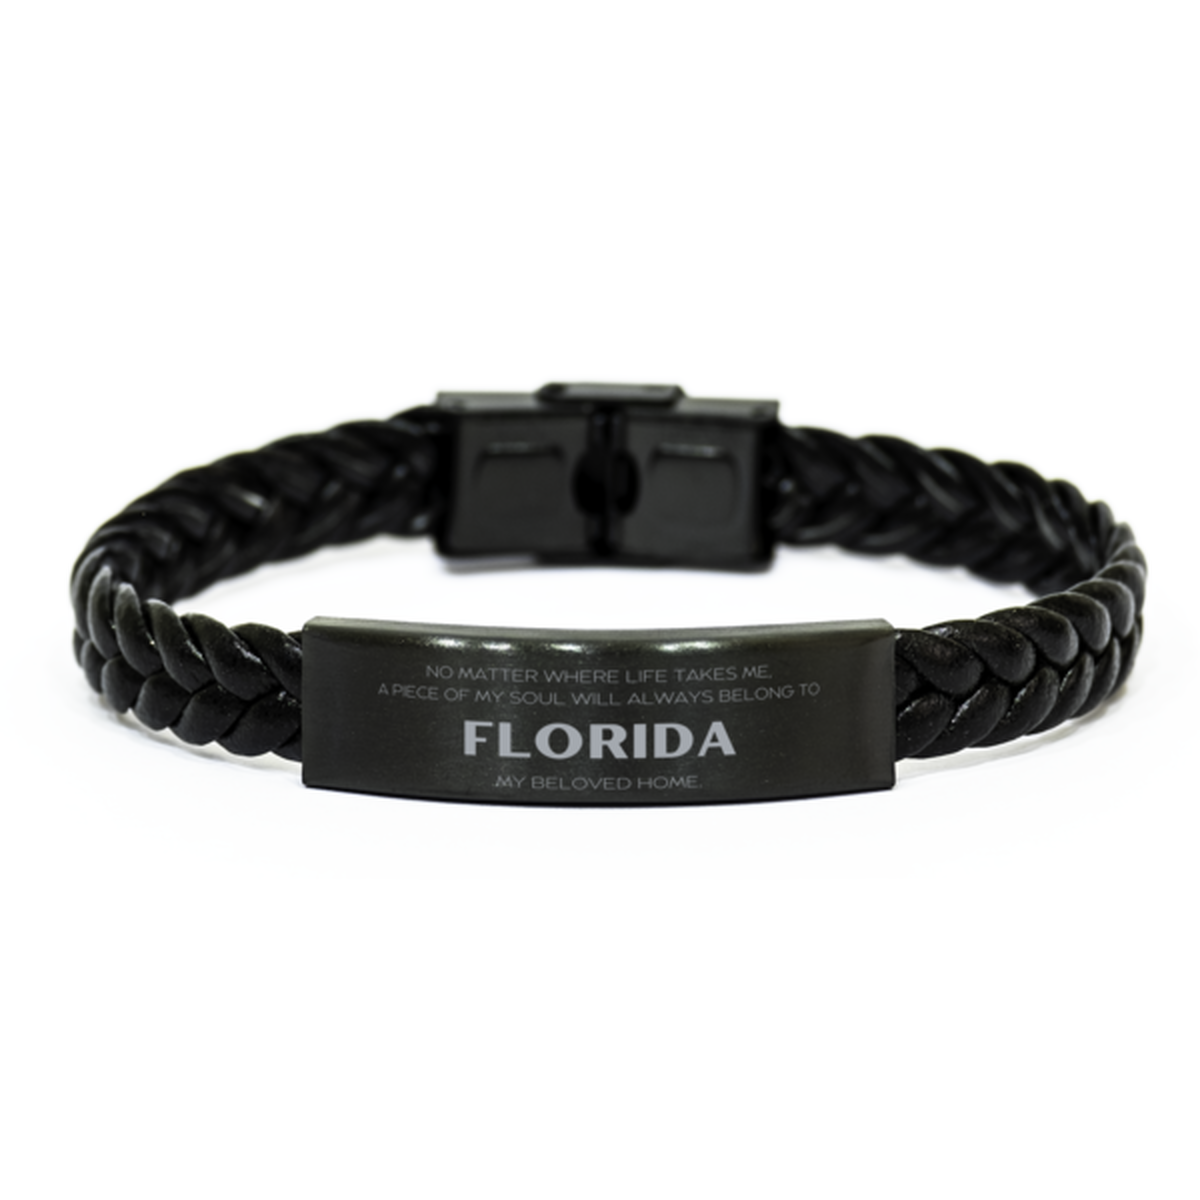 Love Florida State Gifts, My soul will always belong to Florida, Proud Braided Leather Bracelet, Birthday Unique Gifts For Florida Men, Women, Friends